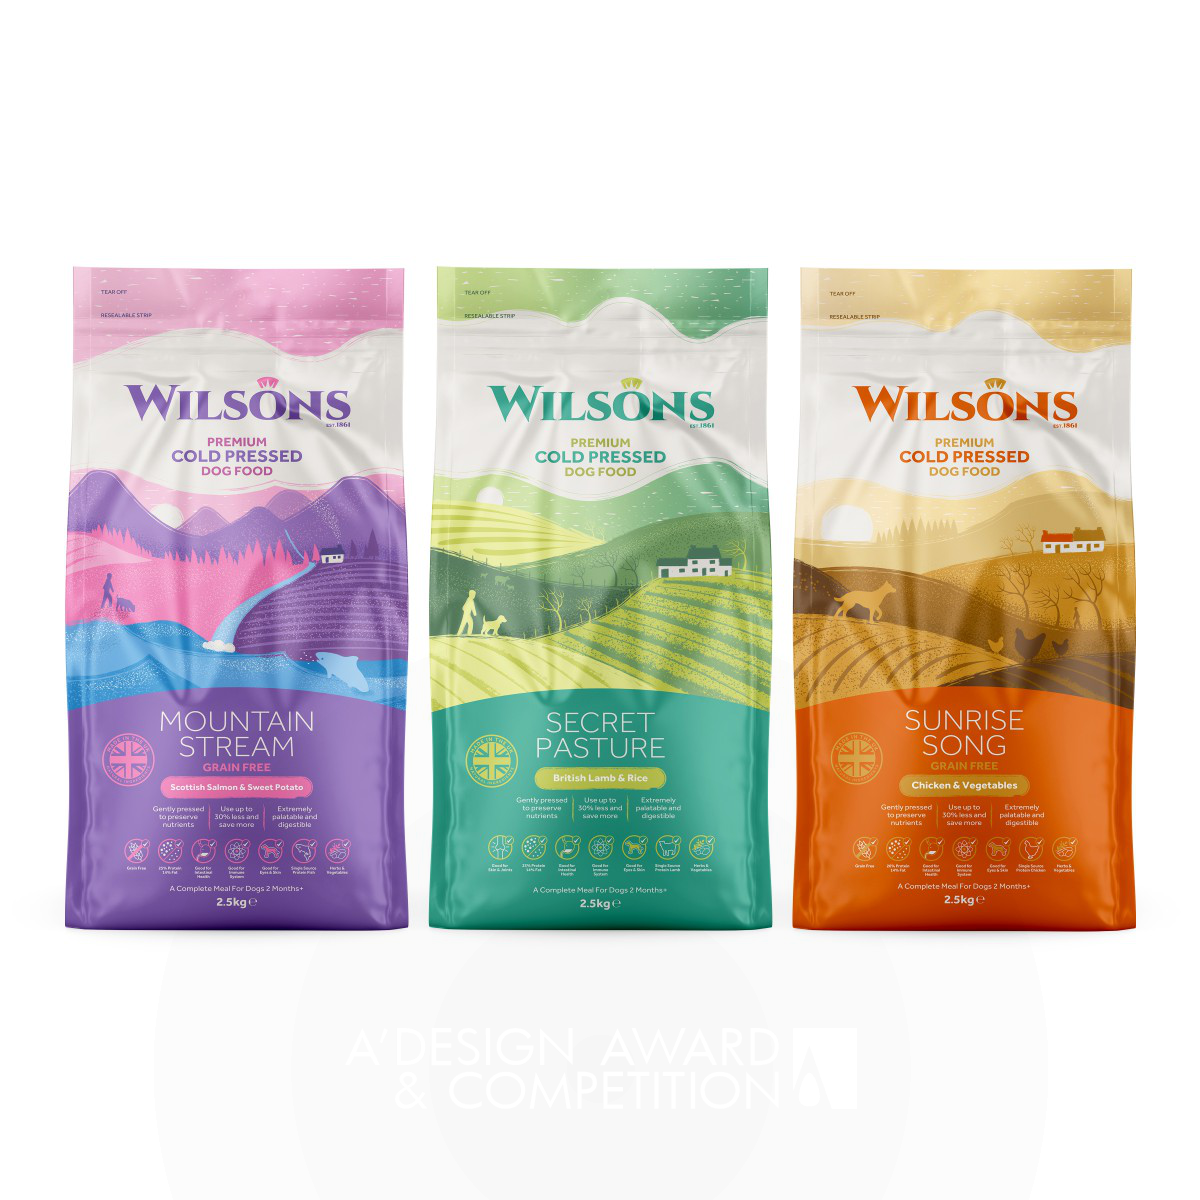 Wilsons Cold Pressed Dog Food Packaging by Gary D Lawson